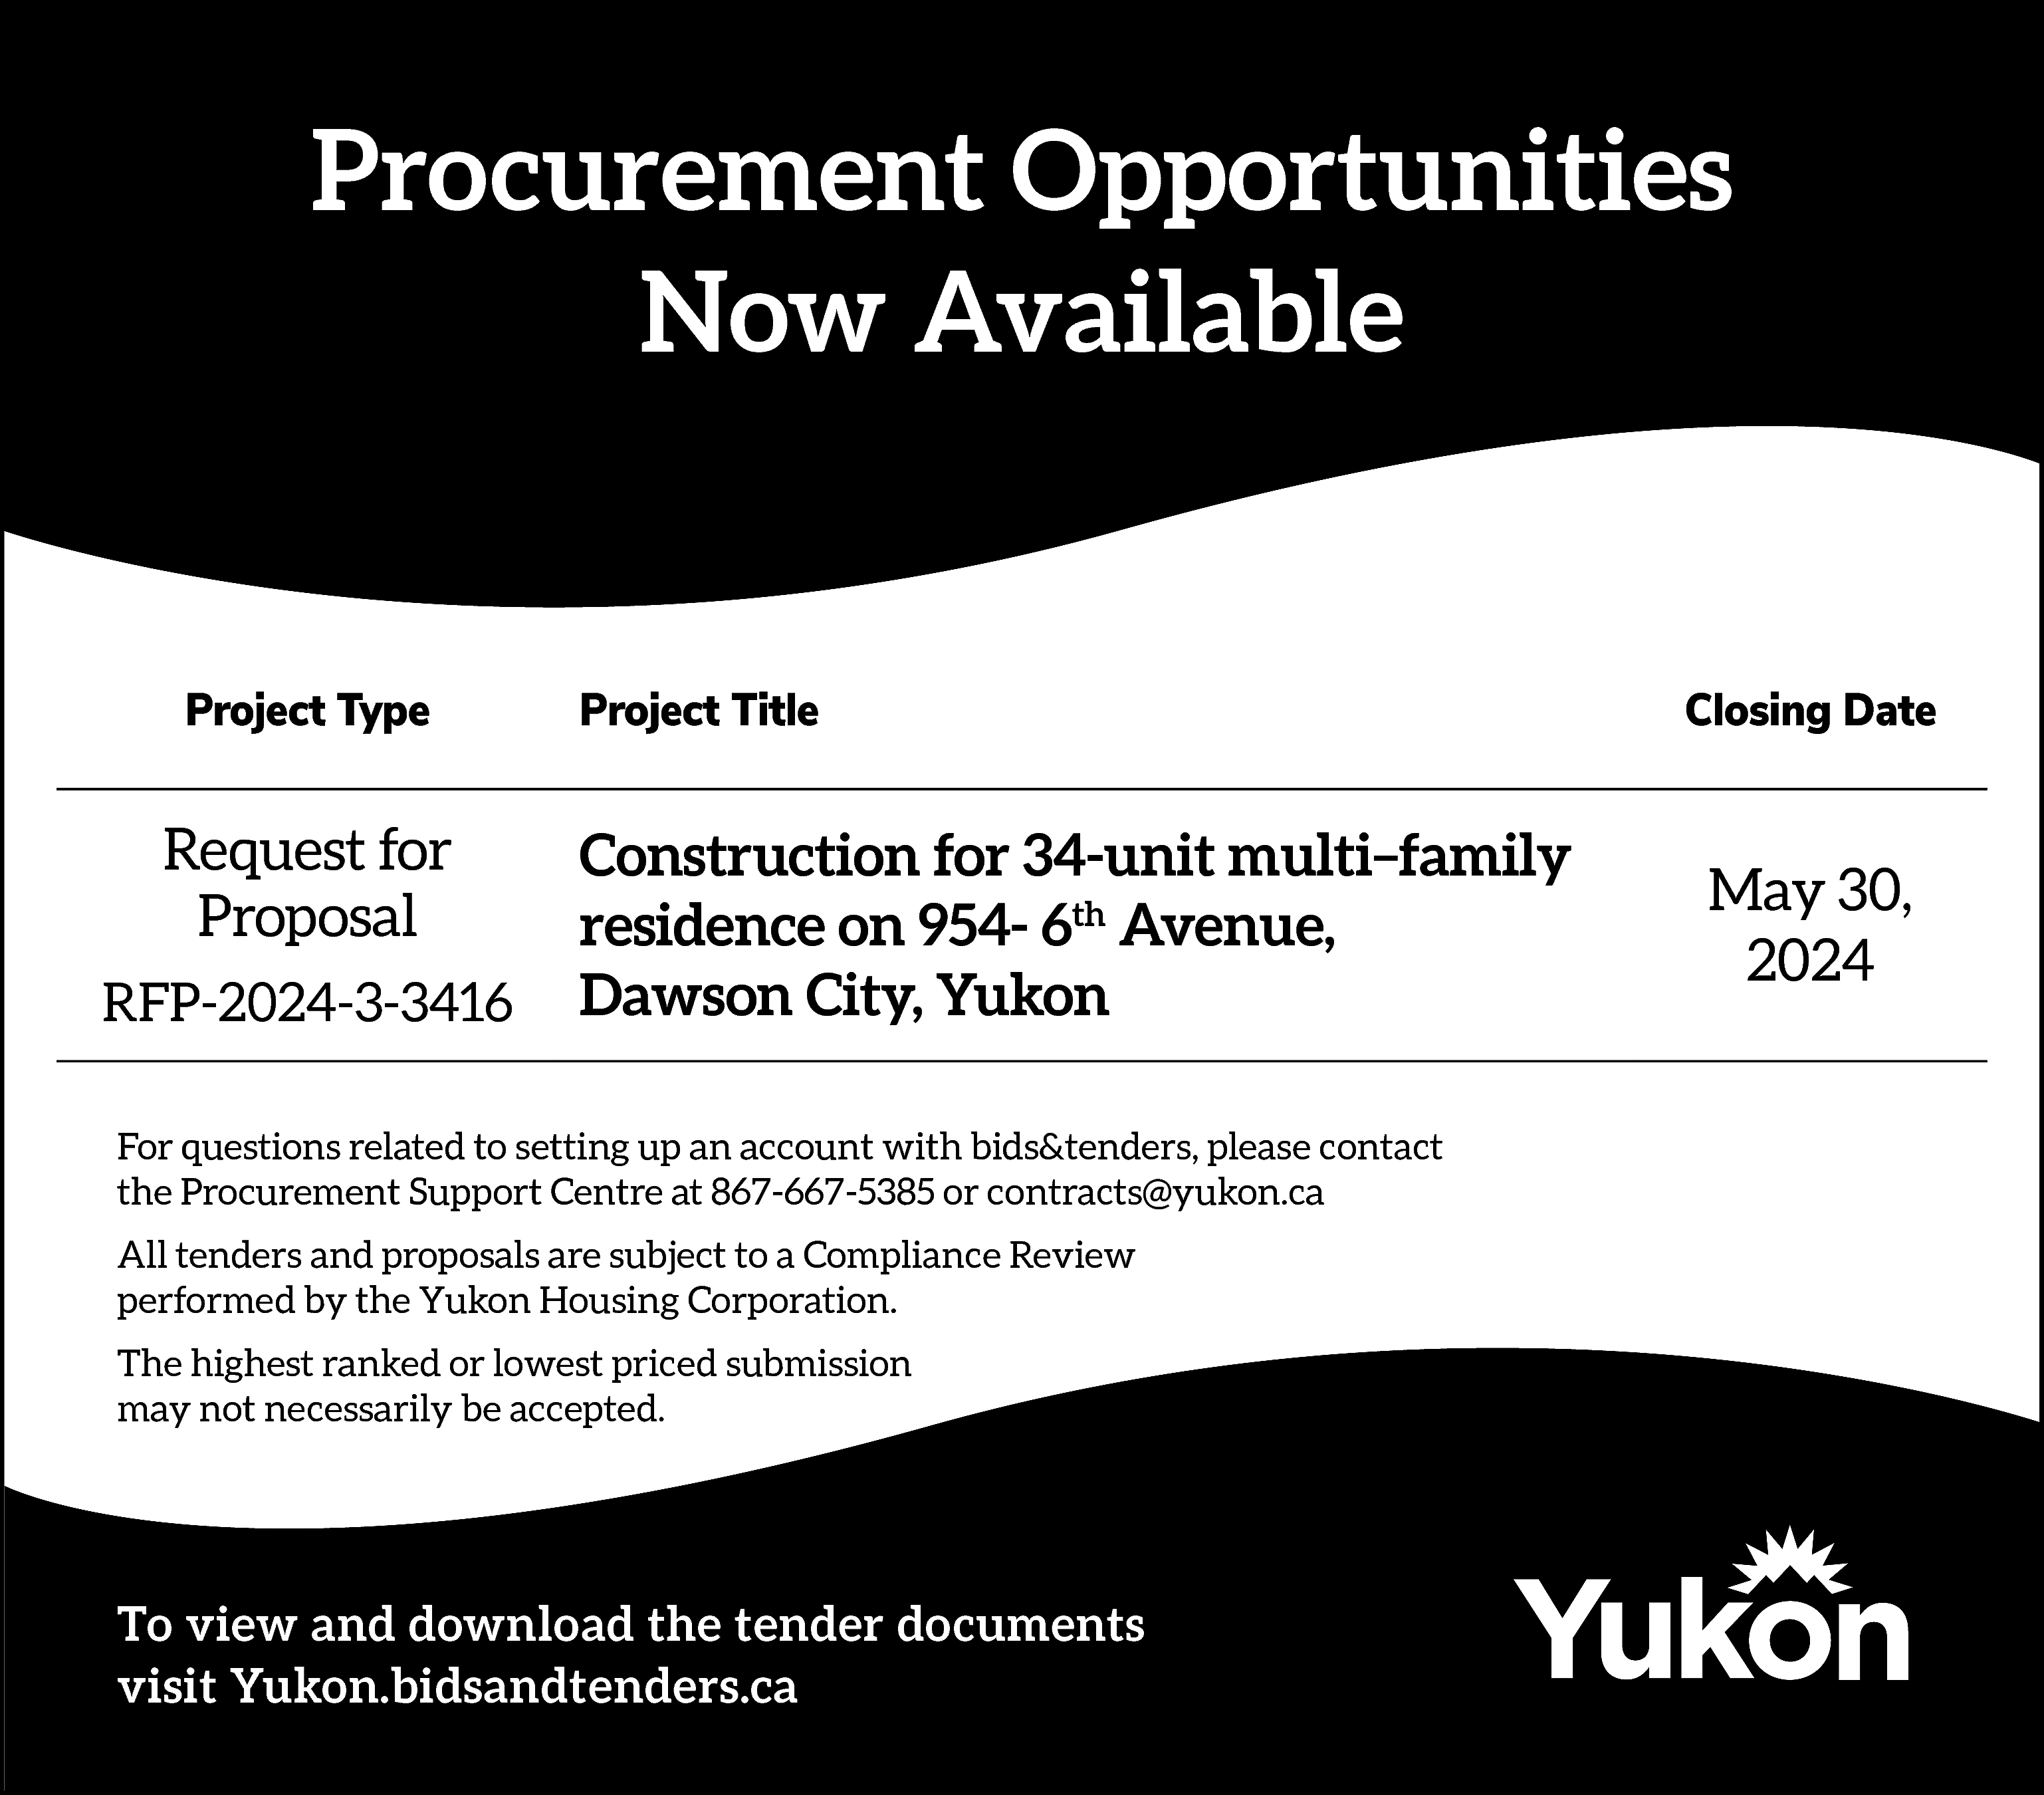 Procurement Opportunities <br>Now Available <br>  Procurement Opportunities  Now Available    Project Type    Request for  Proposal  RFP-2024-3-3416    Project Title    Construction for 34-unit multi–family  residence on 954- 6th Avenue,  Dawson City, Yukon    For questions related to setting up an account with bids&tenders, please contact  the Procurement Support Centre at 867-667-5385 or contracts@yukon.ca  All tenders and proposals are subject to a Compliance Review  performed by the Yukon Housing Corporation.  The highest ranked or lowest priced submission  may not necessarily be accepted.    To view and download the tender documents  visit Yukon.bidsandtenders.ca    Closing Date    May 30,  2024    